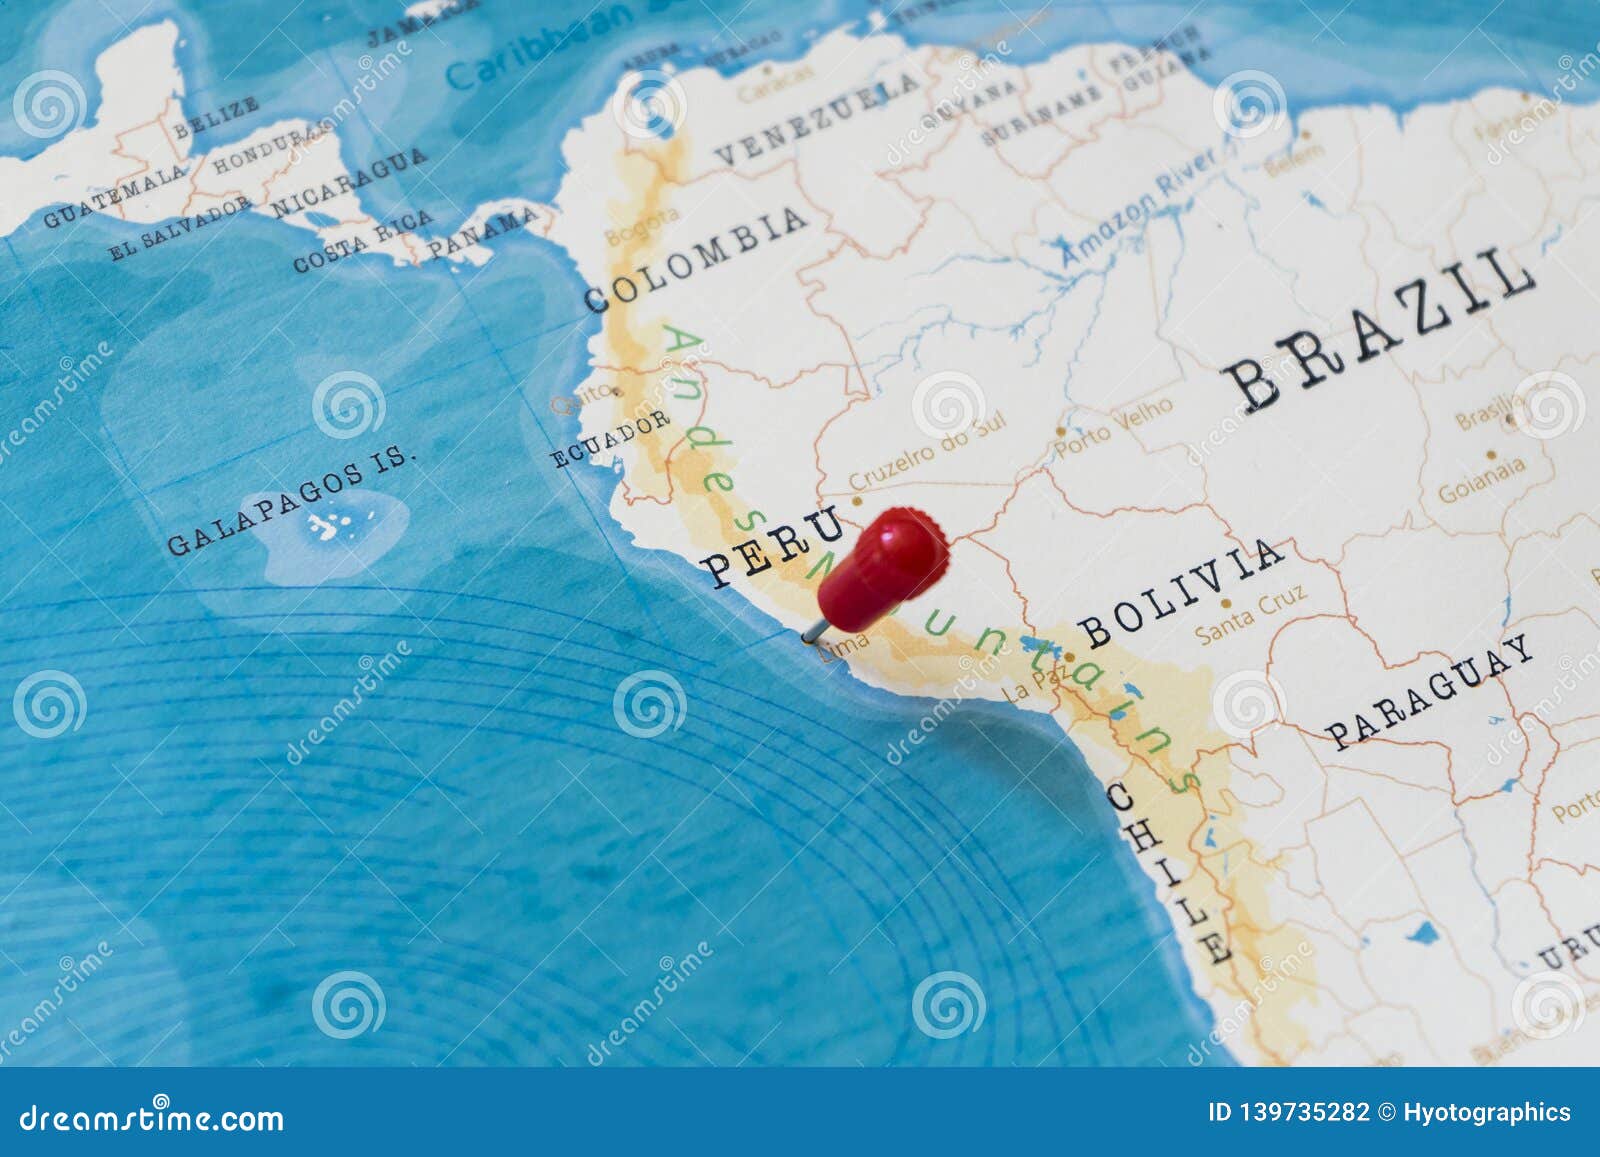 A Pin On Lima Peru In The World Map Stock Photo Image Of